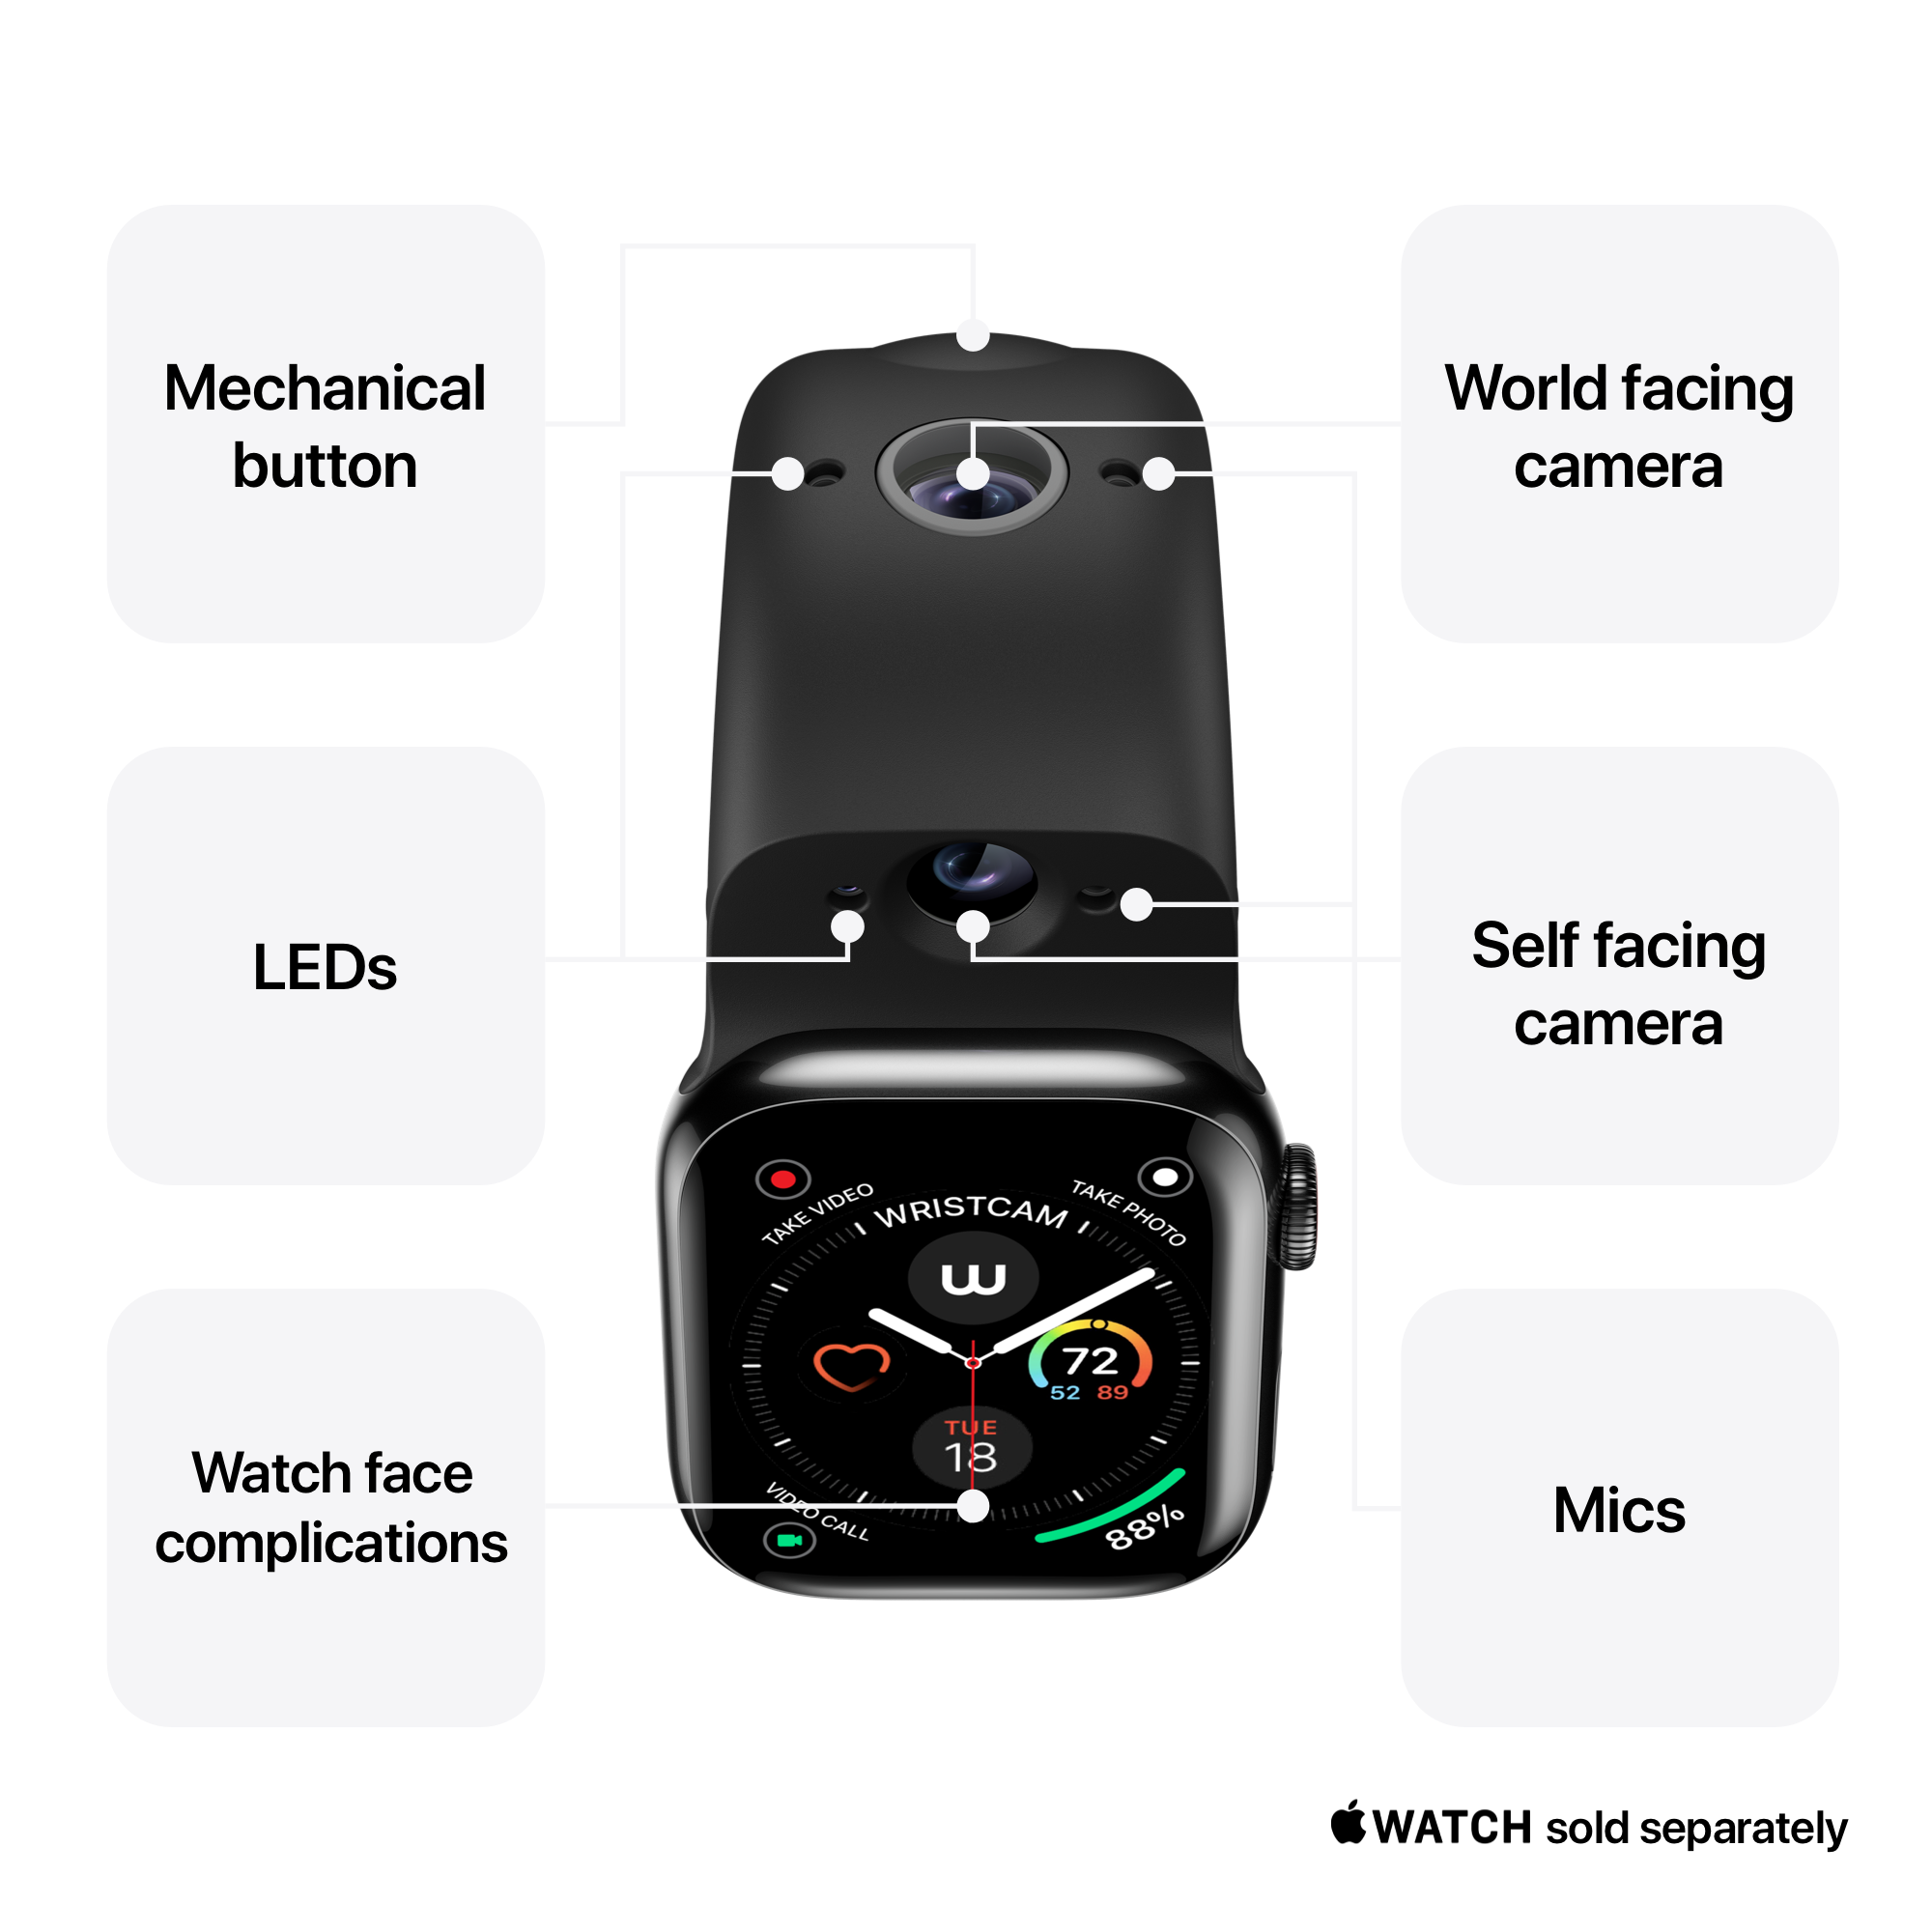 Upcoming Apple watch may include a built-in camera and a novel strap design  | Business Insider India